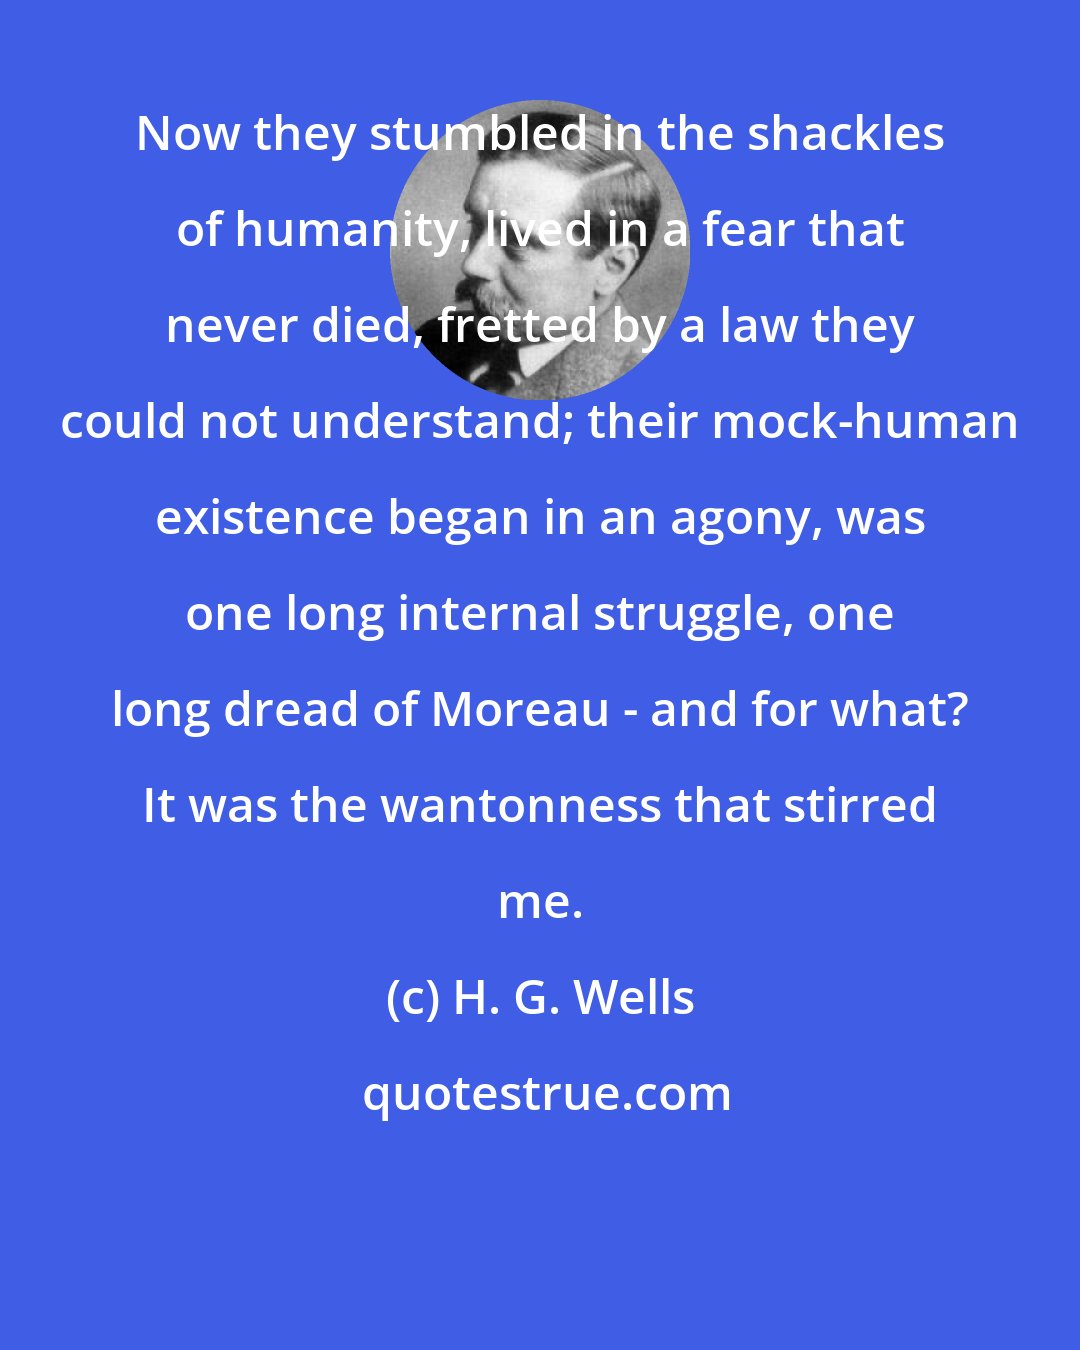 H. G. Wells: Now they stumbled in the shackles of humanity, lived in a fear that never died, fretted by a law they could not understand; their mock-human existence began in an agony, was one long internal struggle, one long dread of Moreau - and for what? It was the wantonness that stirred me.